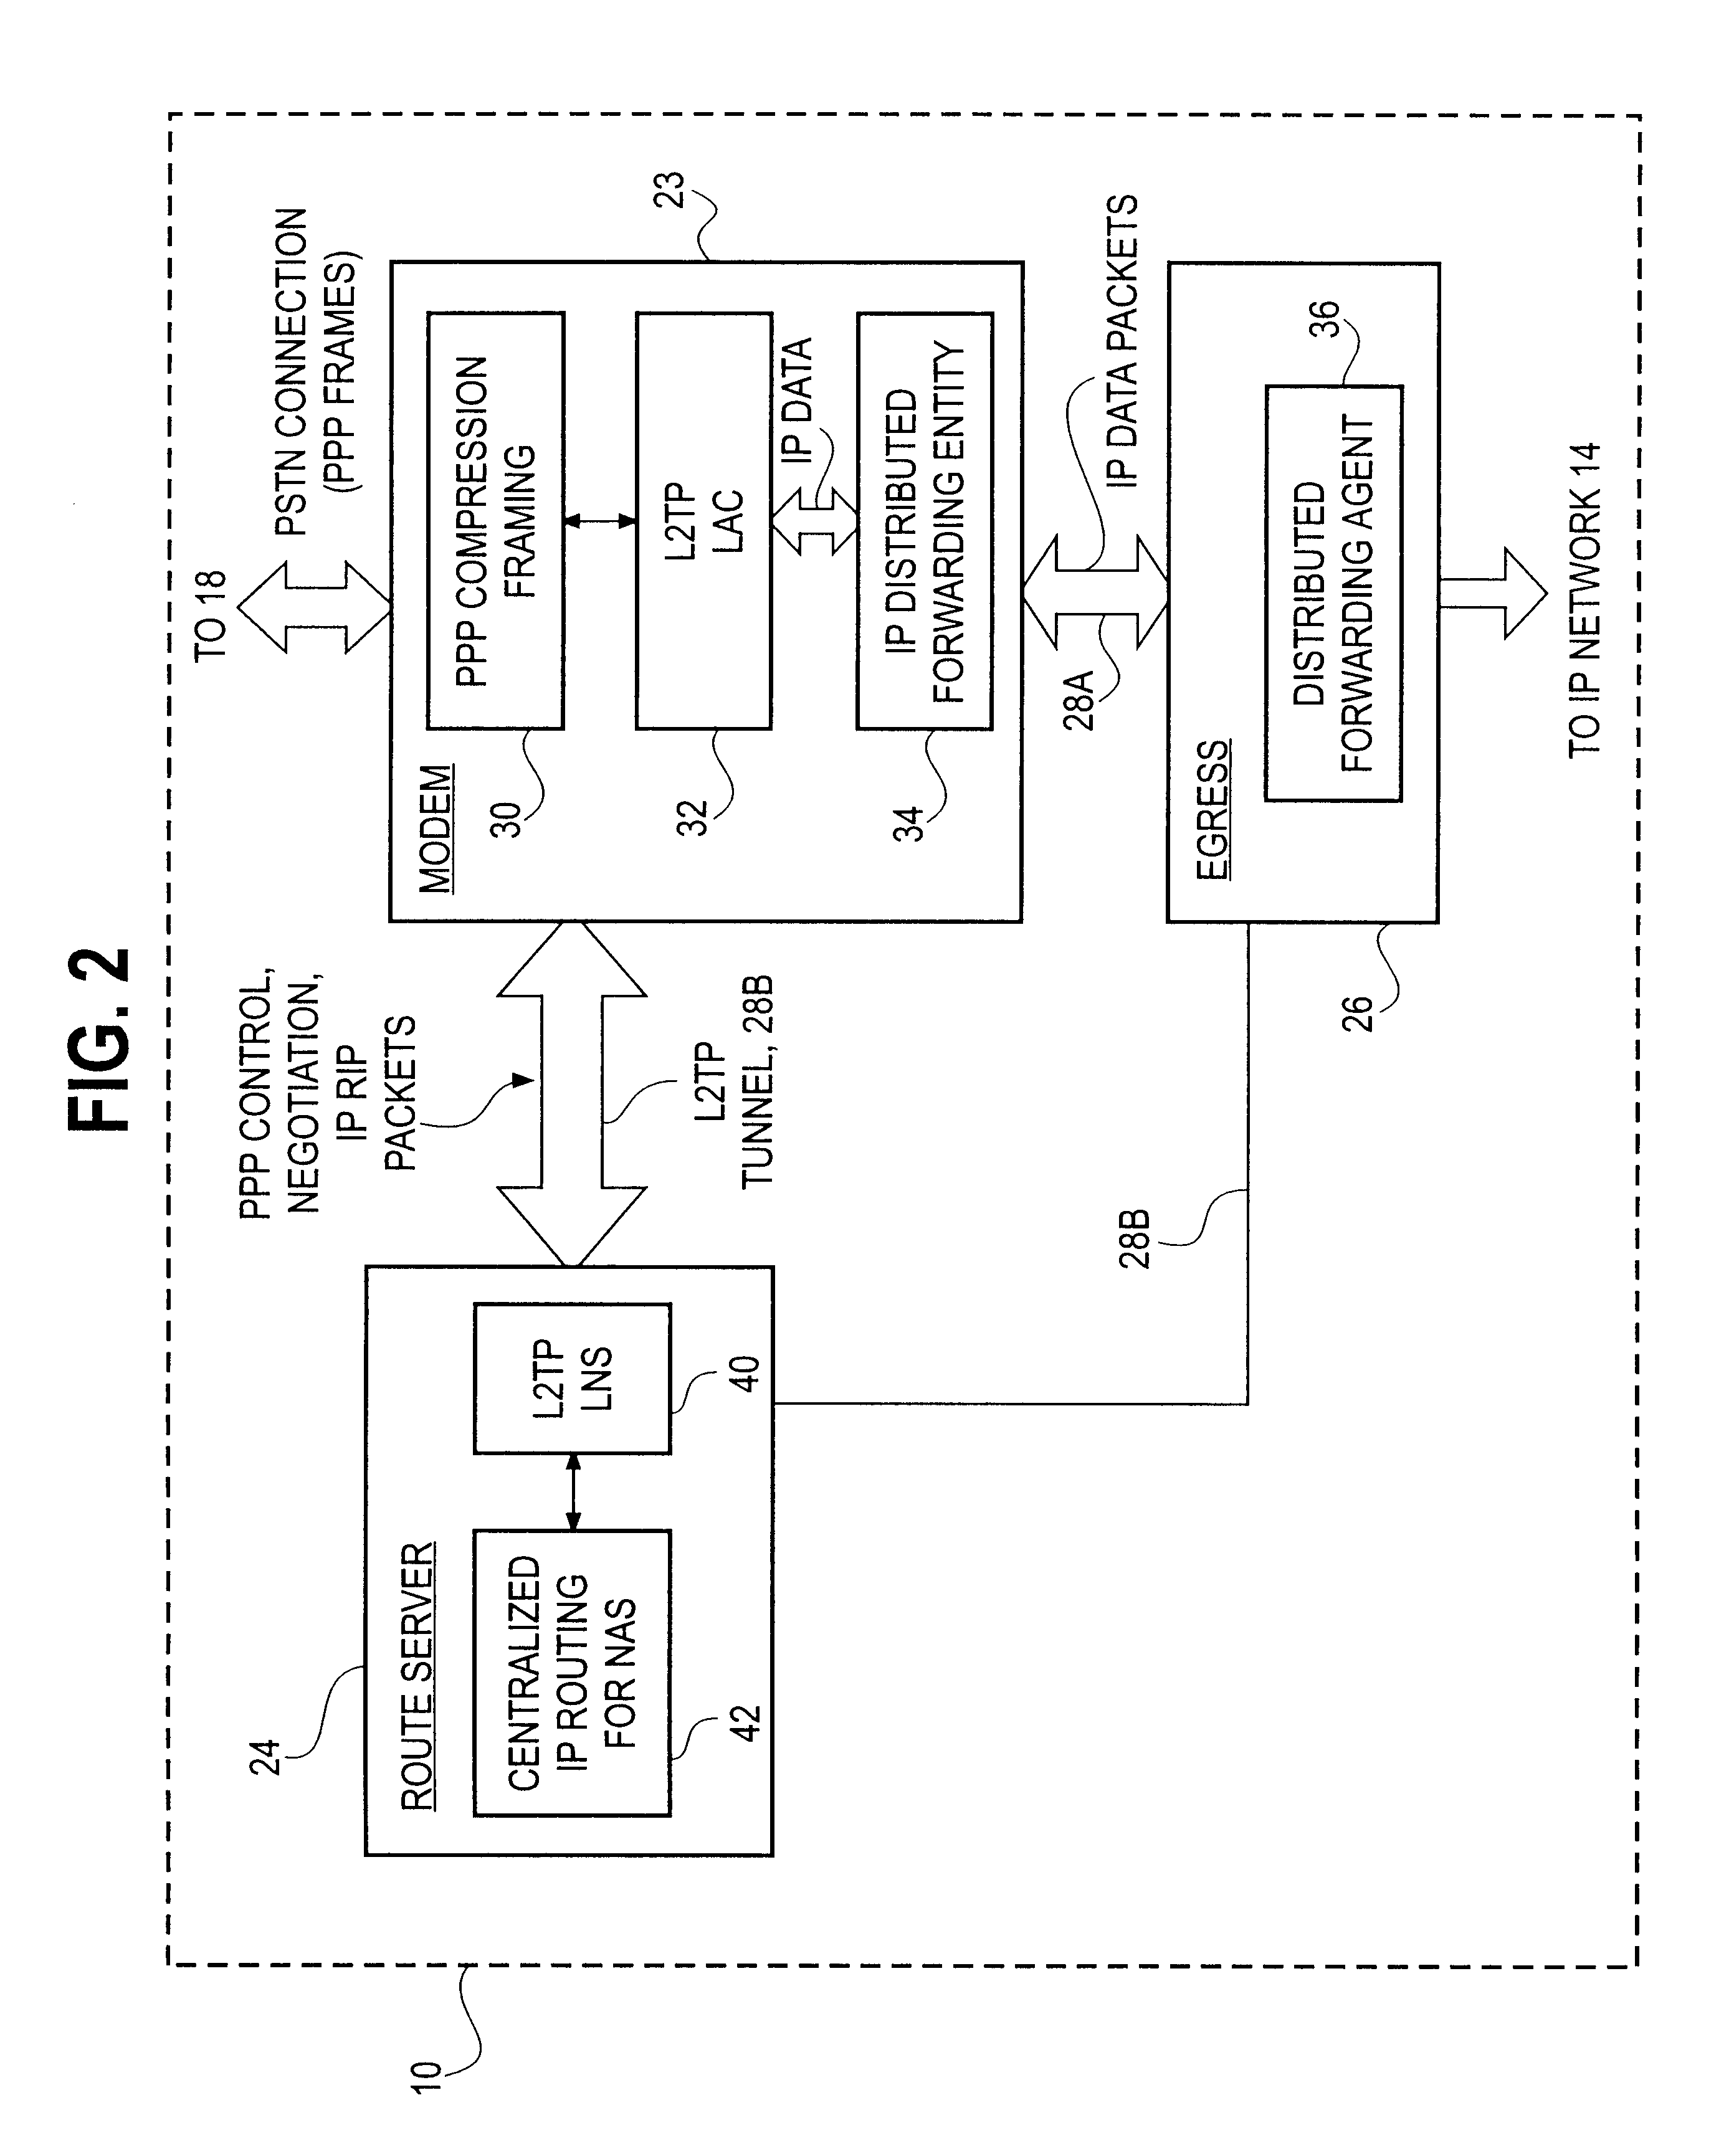 Distributed protocol processing and packet forwarding using tunneling protocols